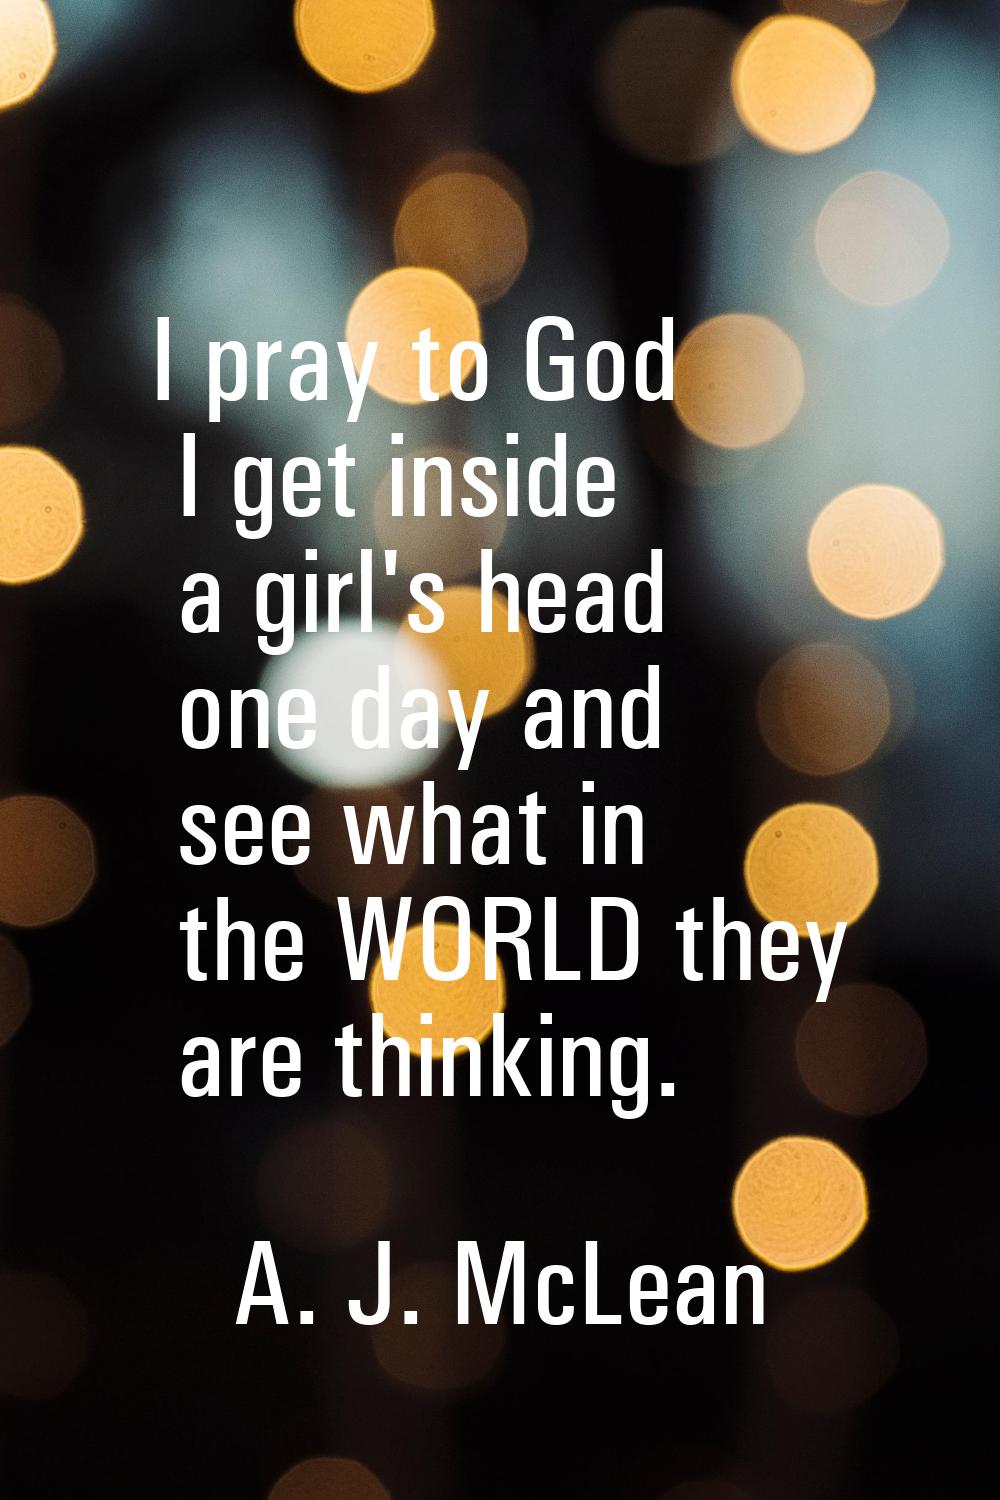 I pray to God I get inside a girl's head one day and see what in the WORLD they are thinking.